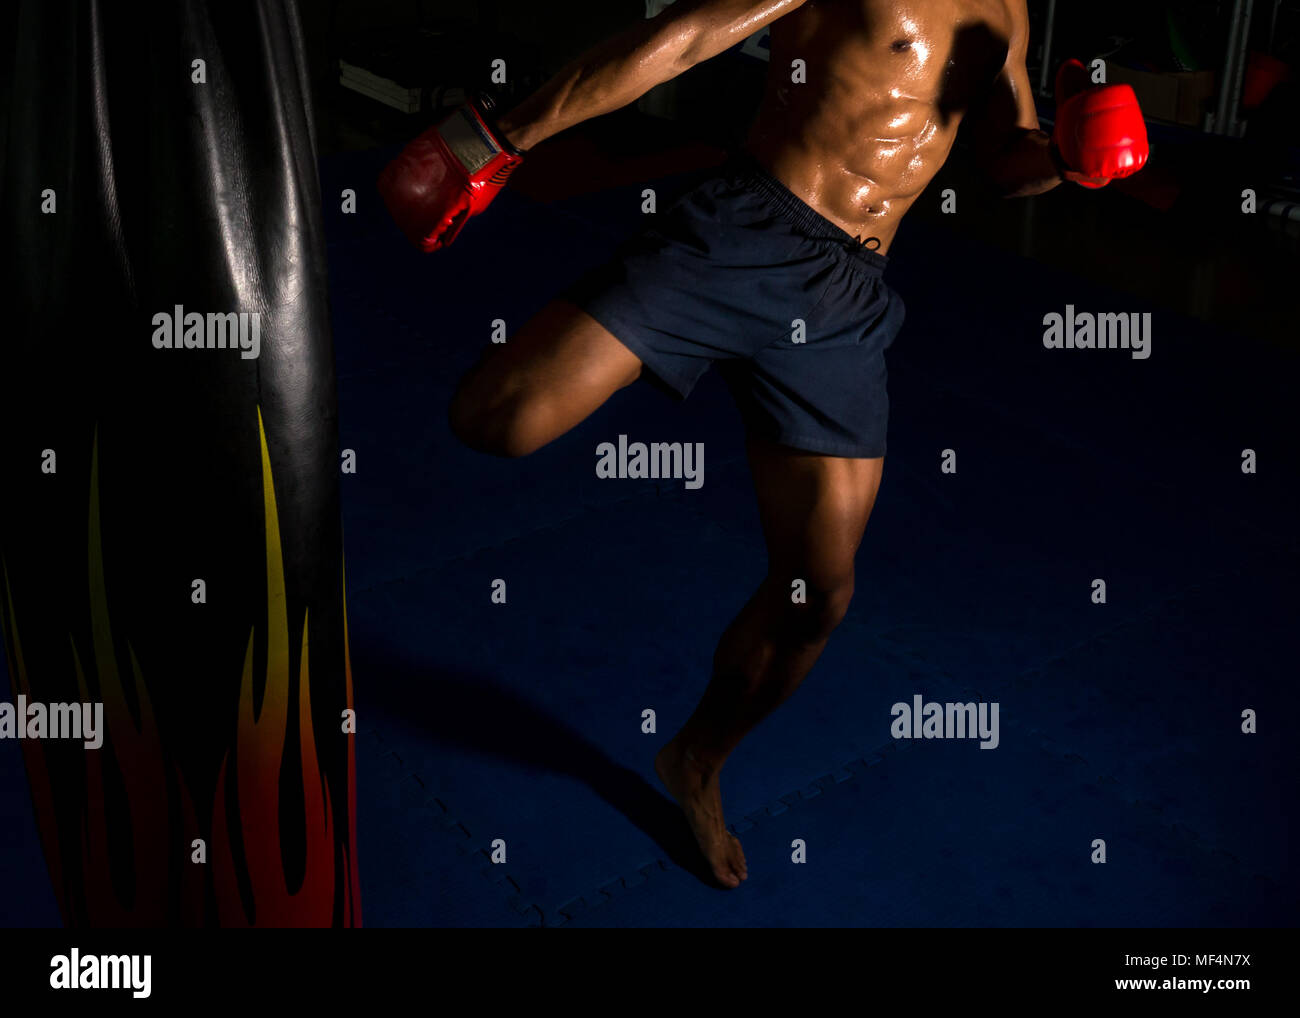 boxer kick at the target on boxing ring in gym, Thai boxing which is the famous sport in Thailand Stock Photo